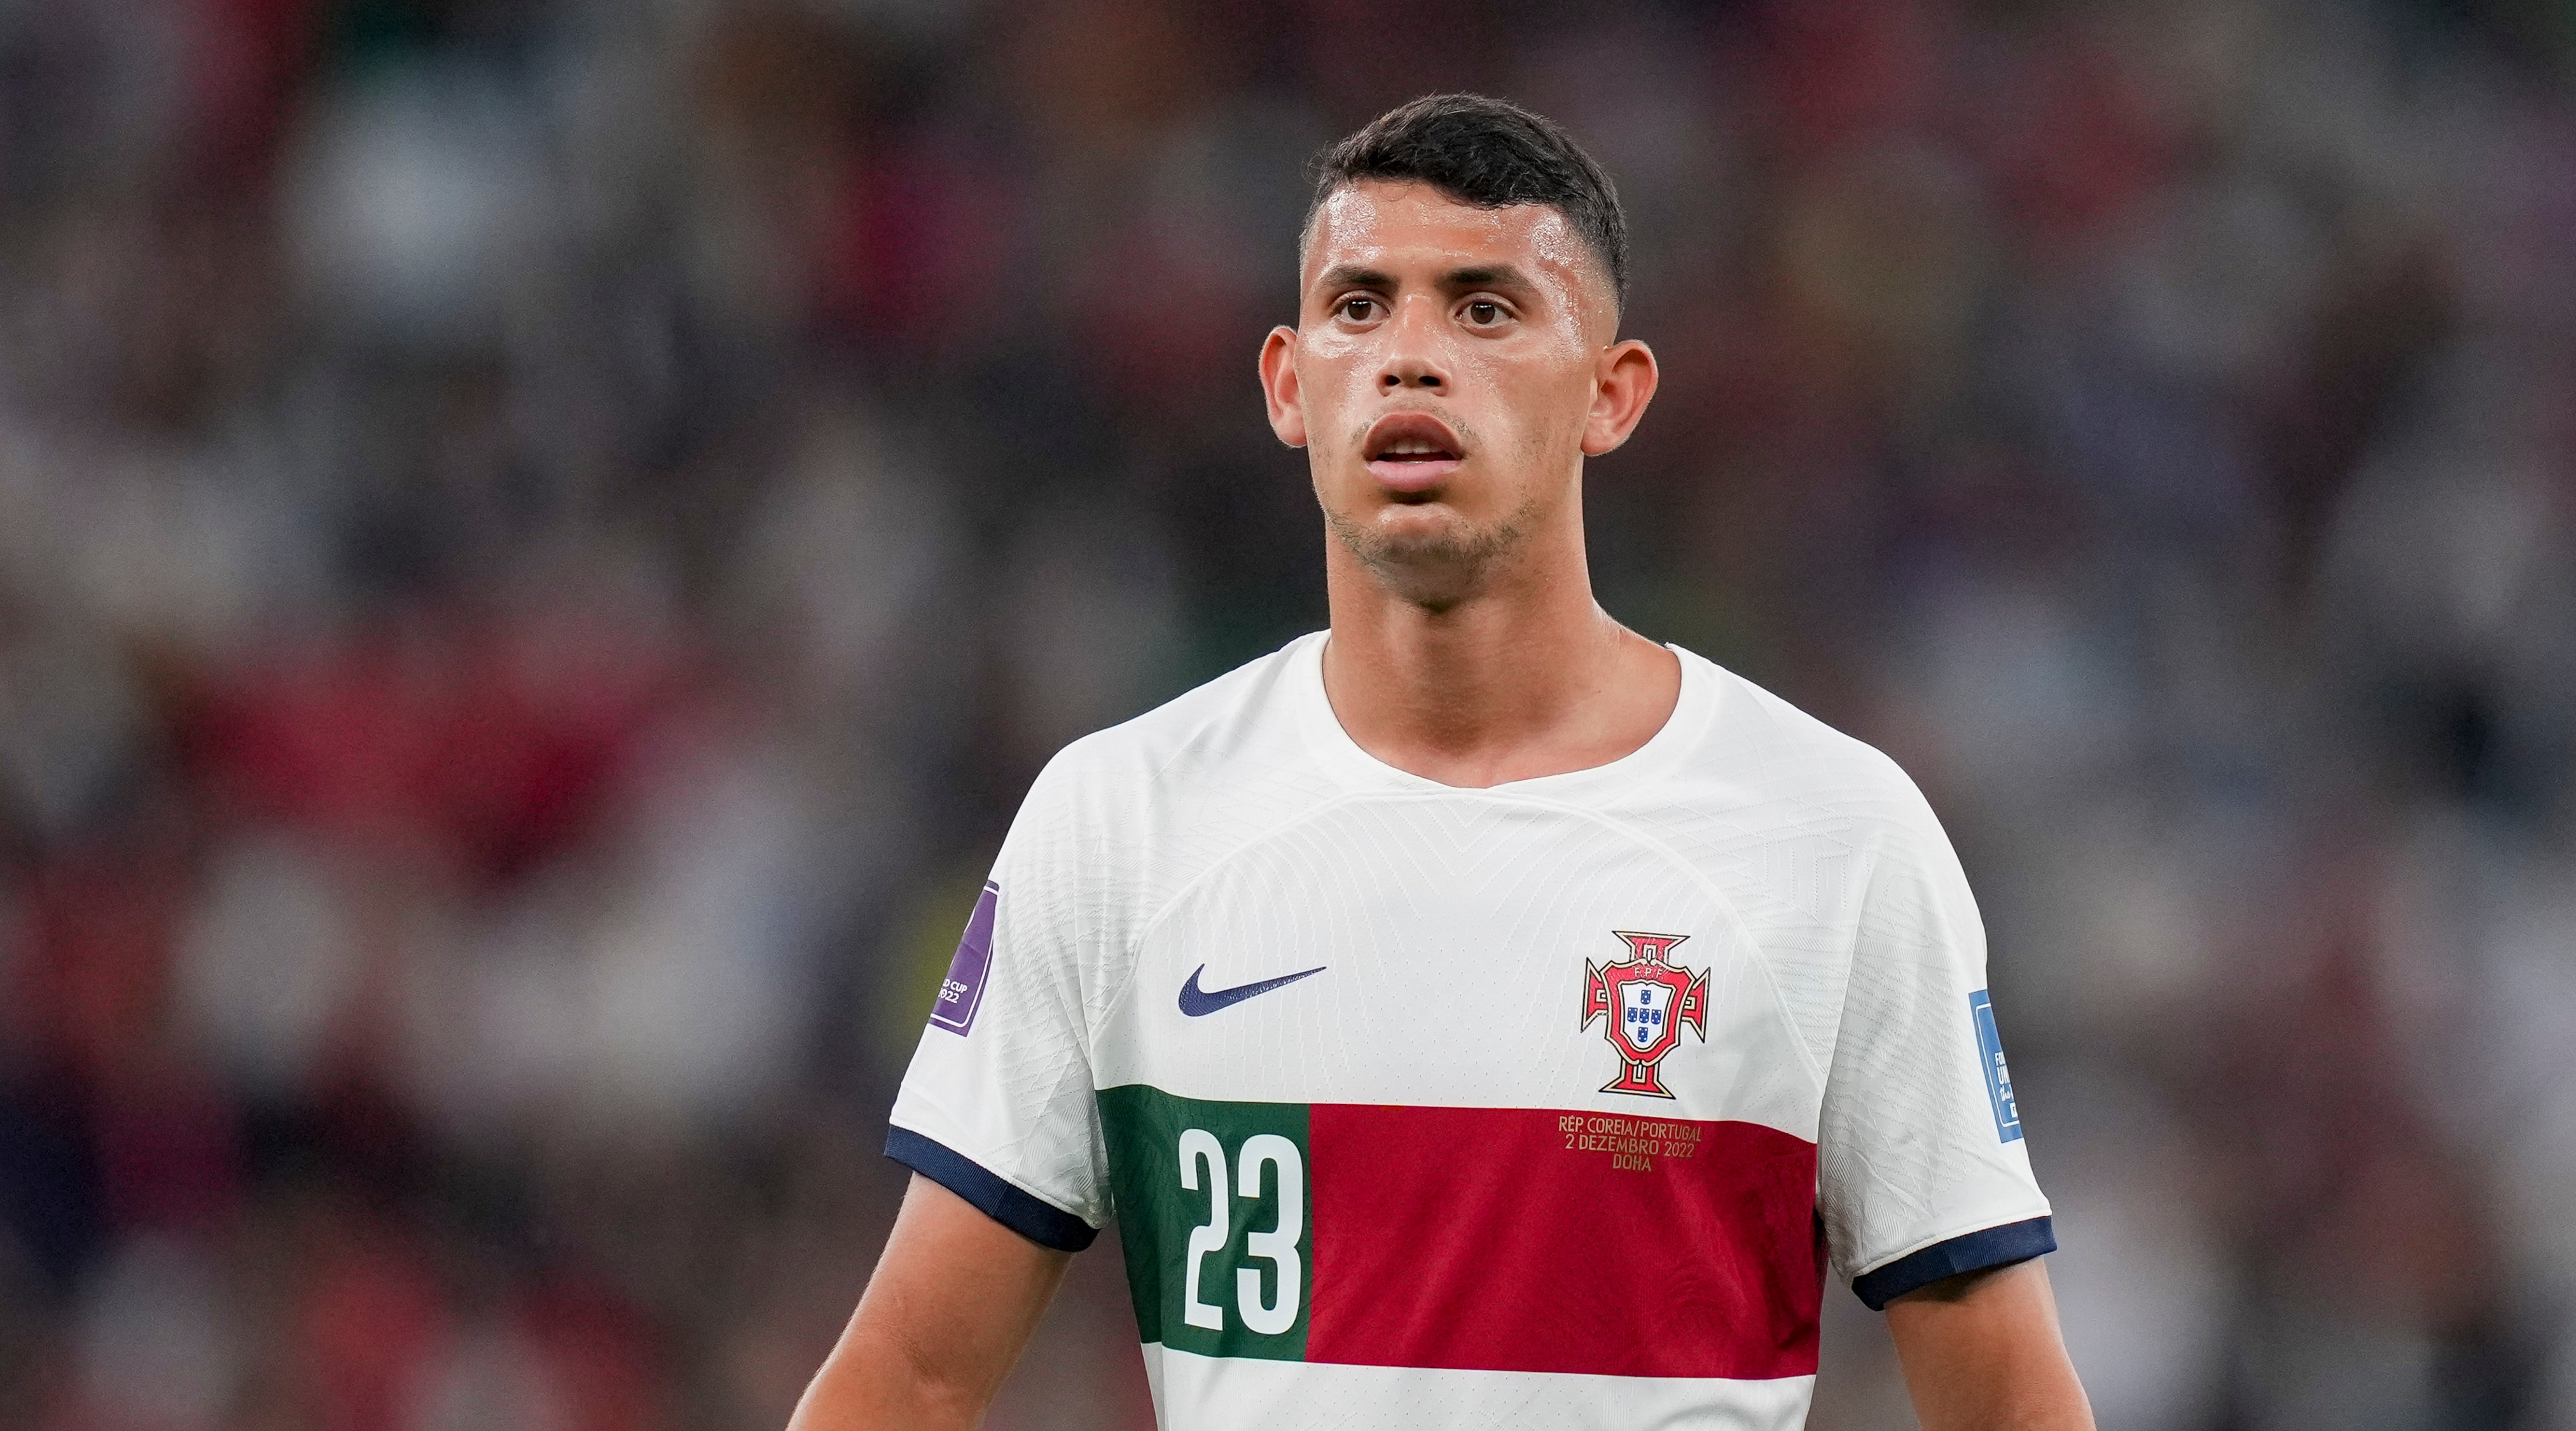 Matheus Nunes of Portugal looks on during the FIFA World Cup 2022 group stage match between Korea Republic and Portugal at the Education City Stadium on December 2, 2022 in Al Rayyan, Qatar.